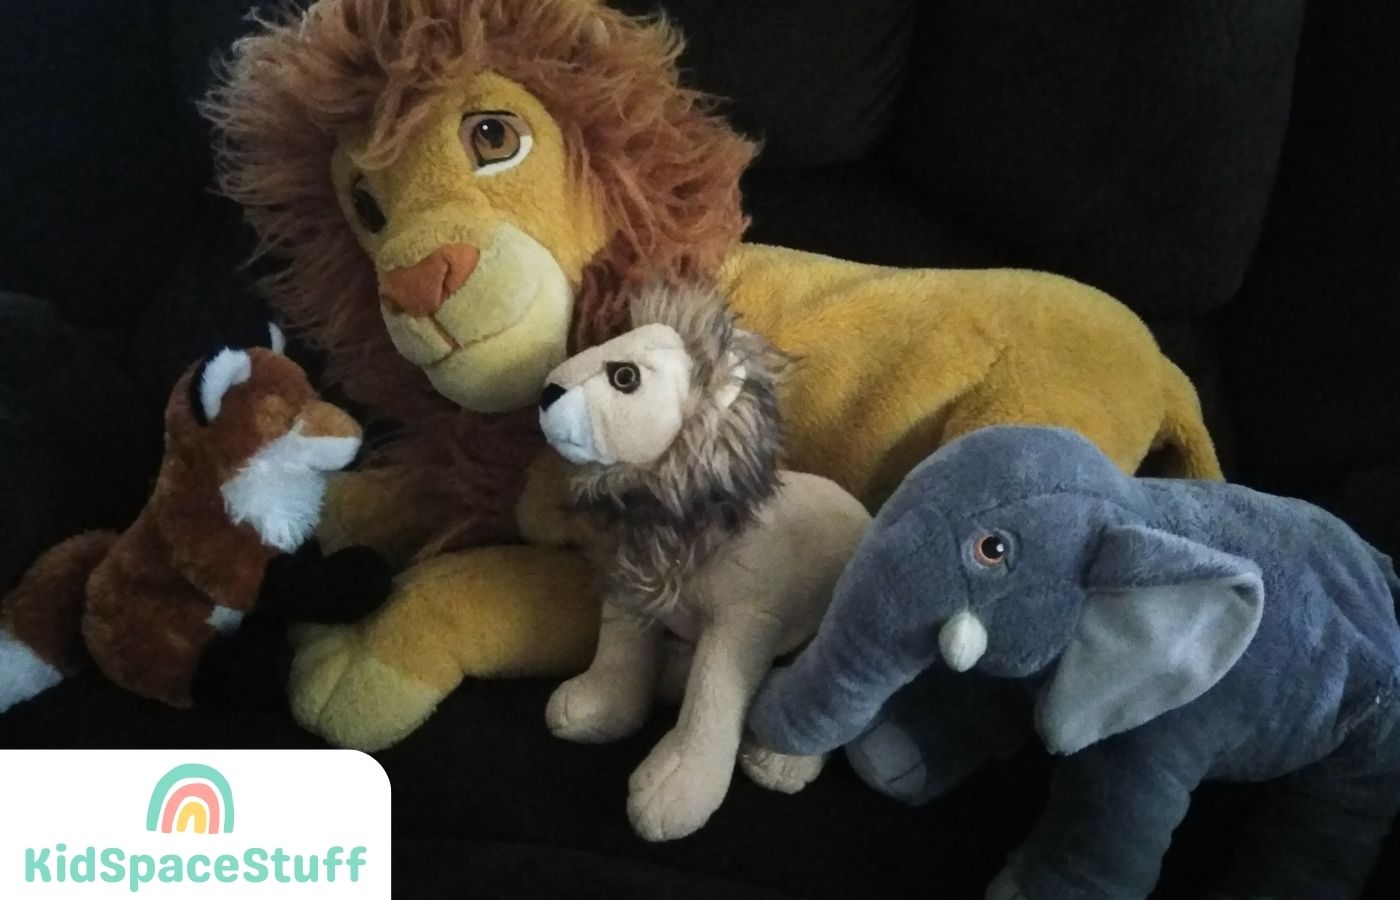 250+ Names for Stuffed Animals (Cute & Funny Names!)